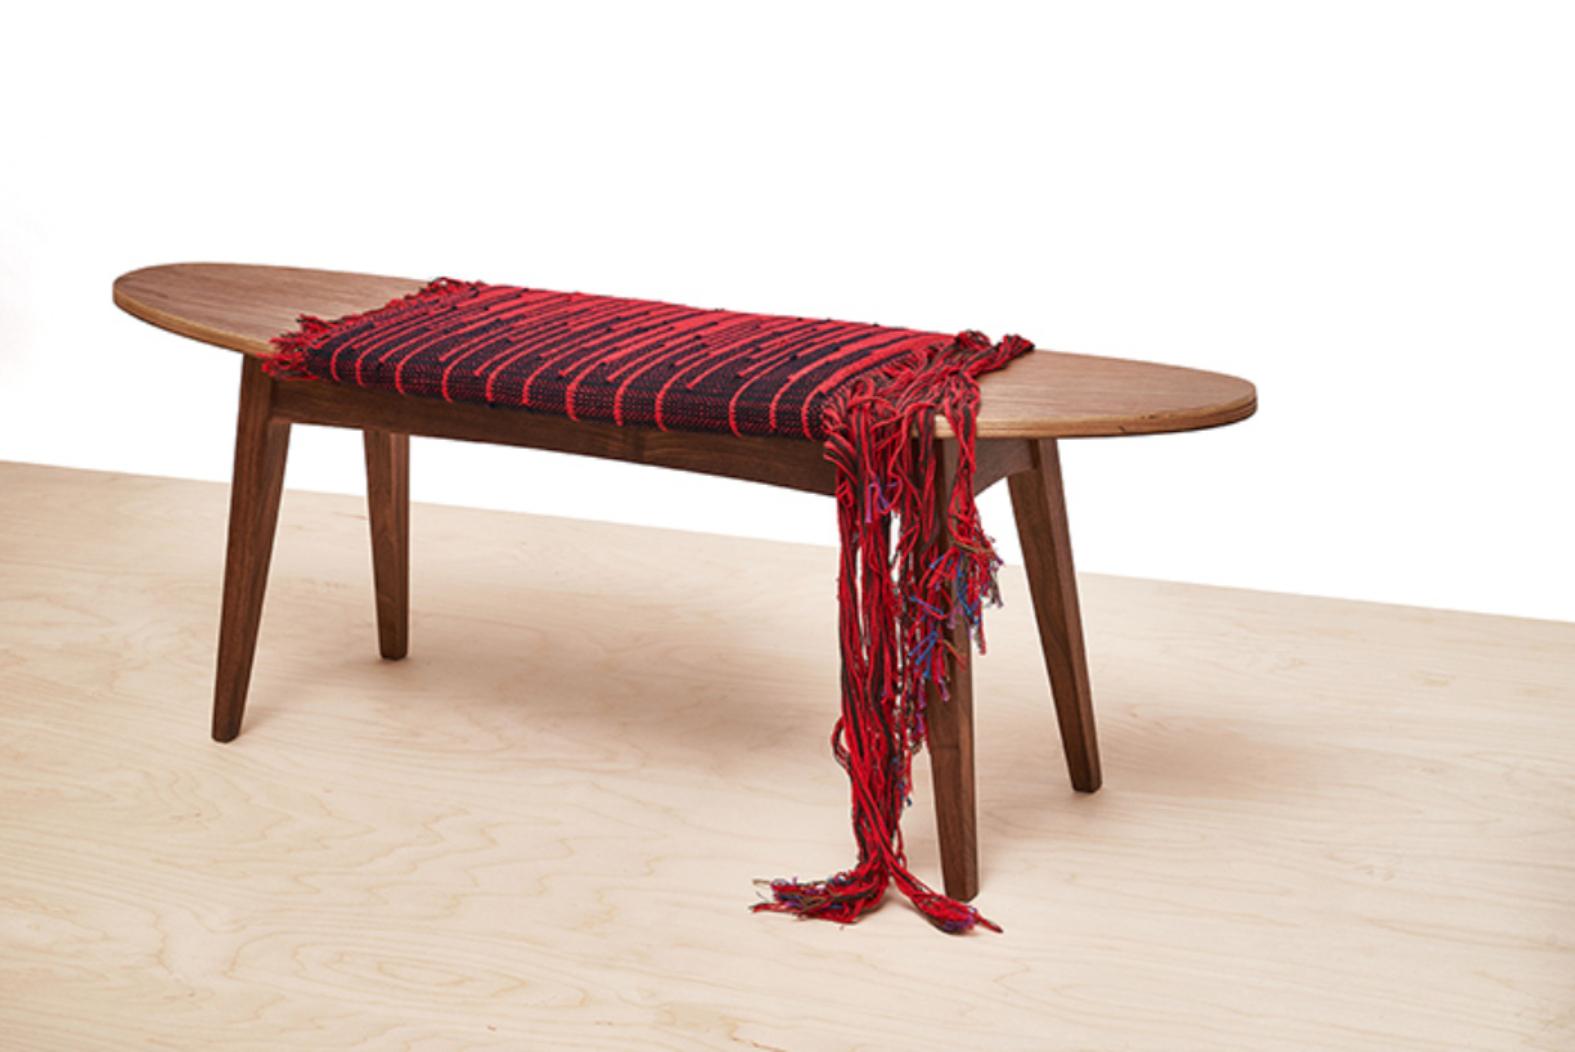 SURF Unic bench by Jean-Baptiste Van den Heede
Dimensions: L 118 x D 34 x H 43 cm
Materials: Oak, Textile.
Also available: Other textiles available,

The “SURF unic” version proposes a versatile bench since it can be used without upholstery or